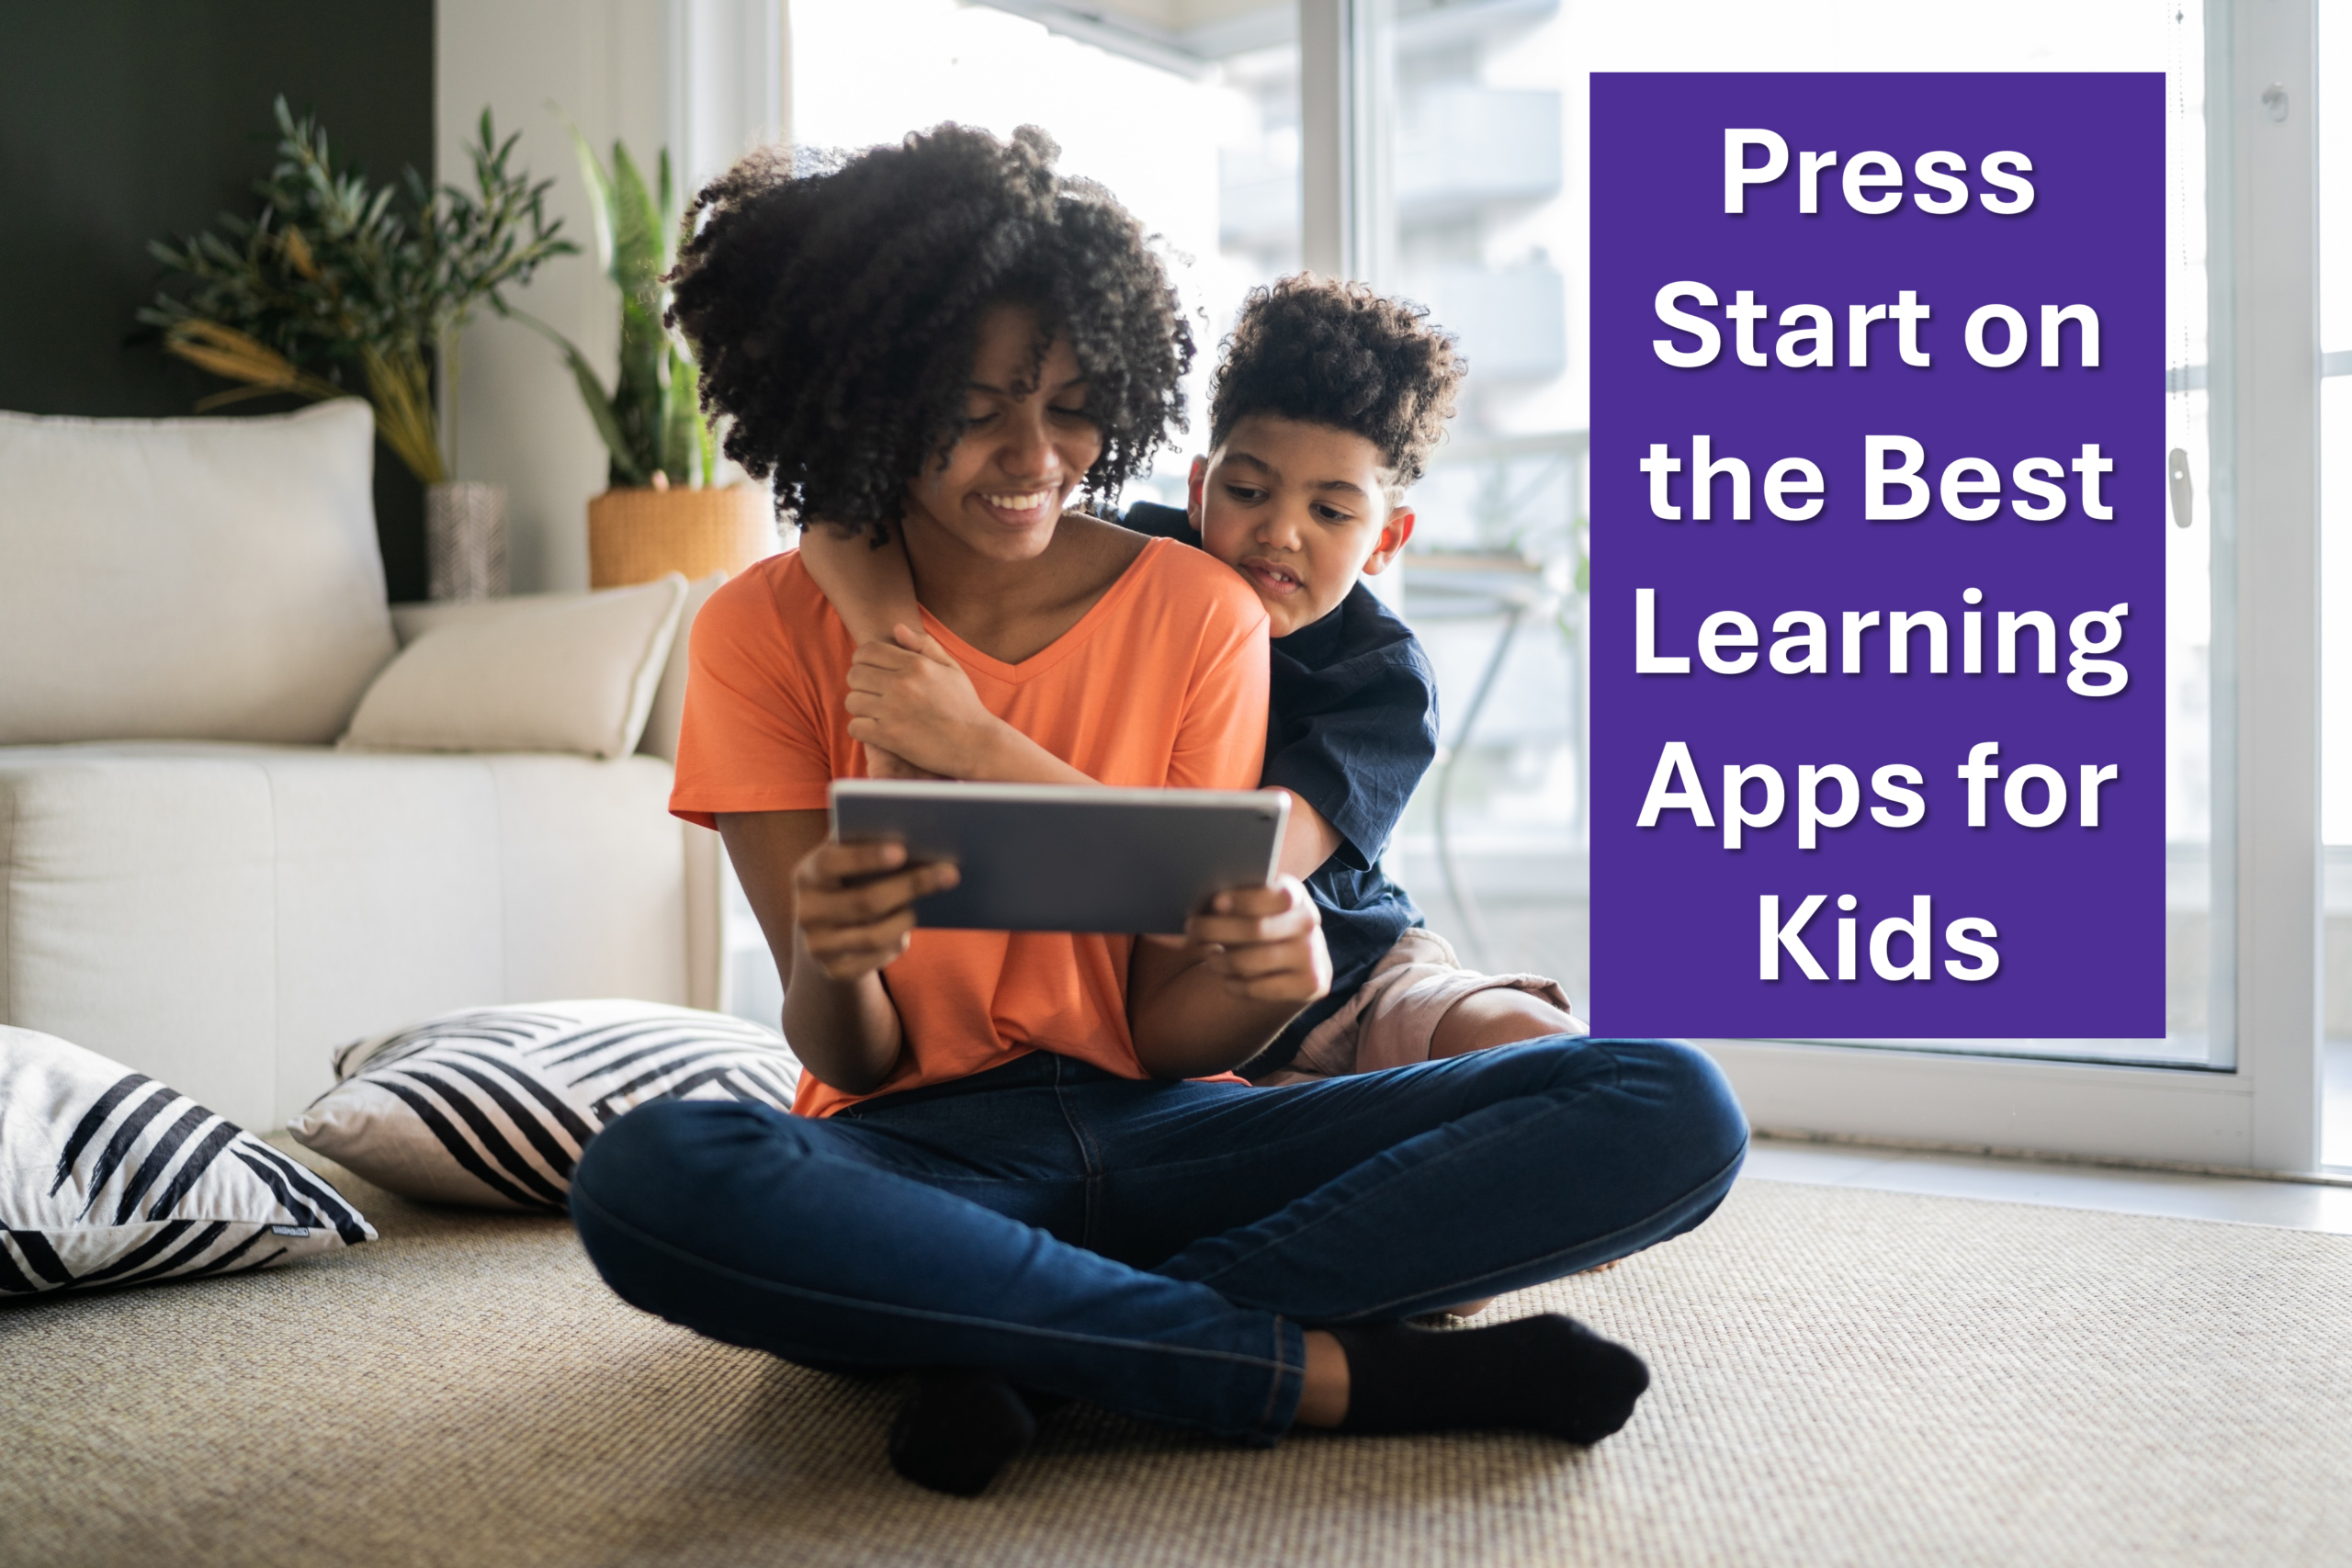 Find the best learning apps for kids